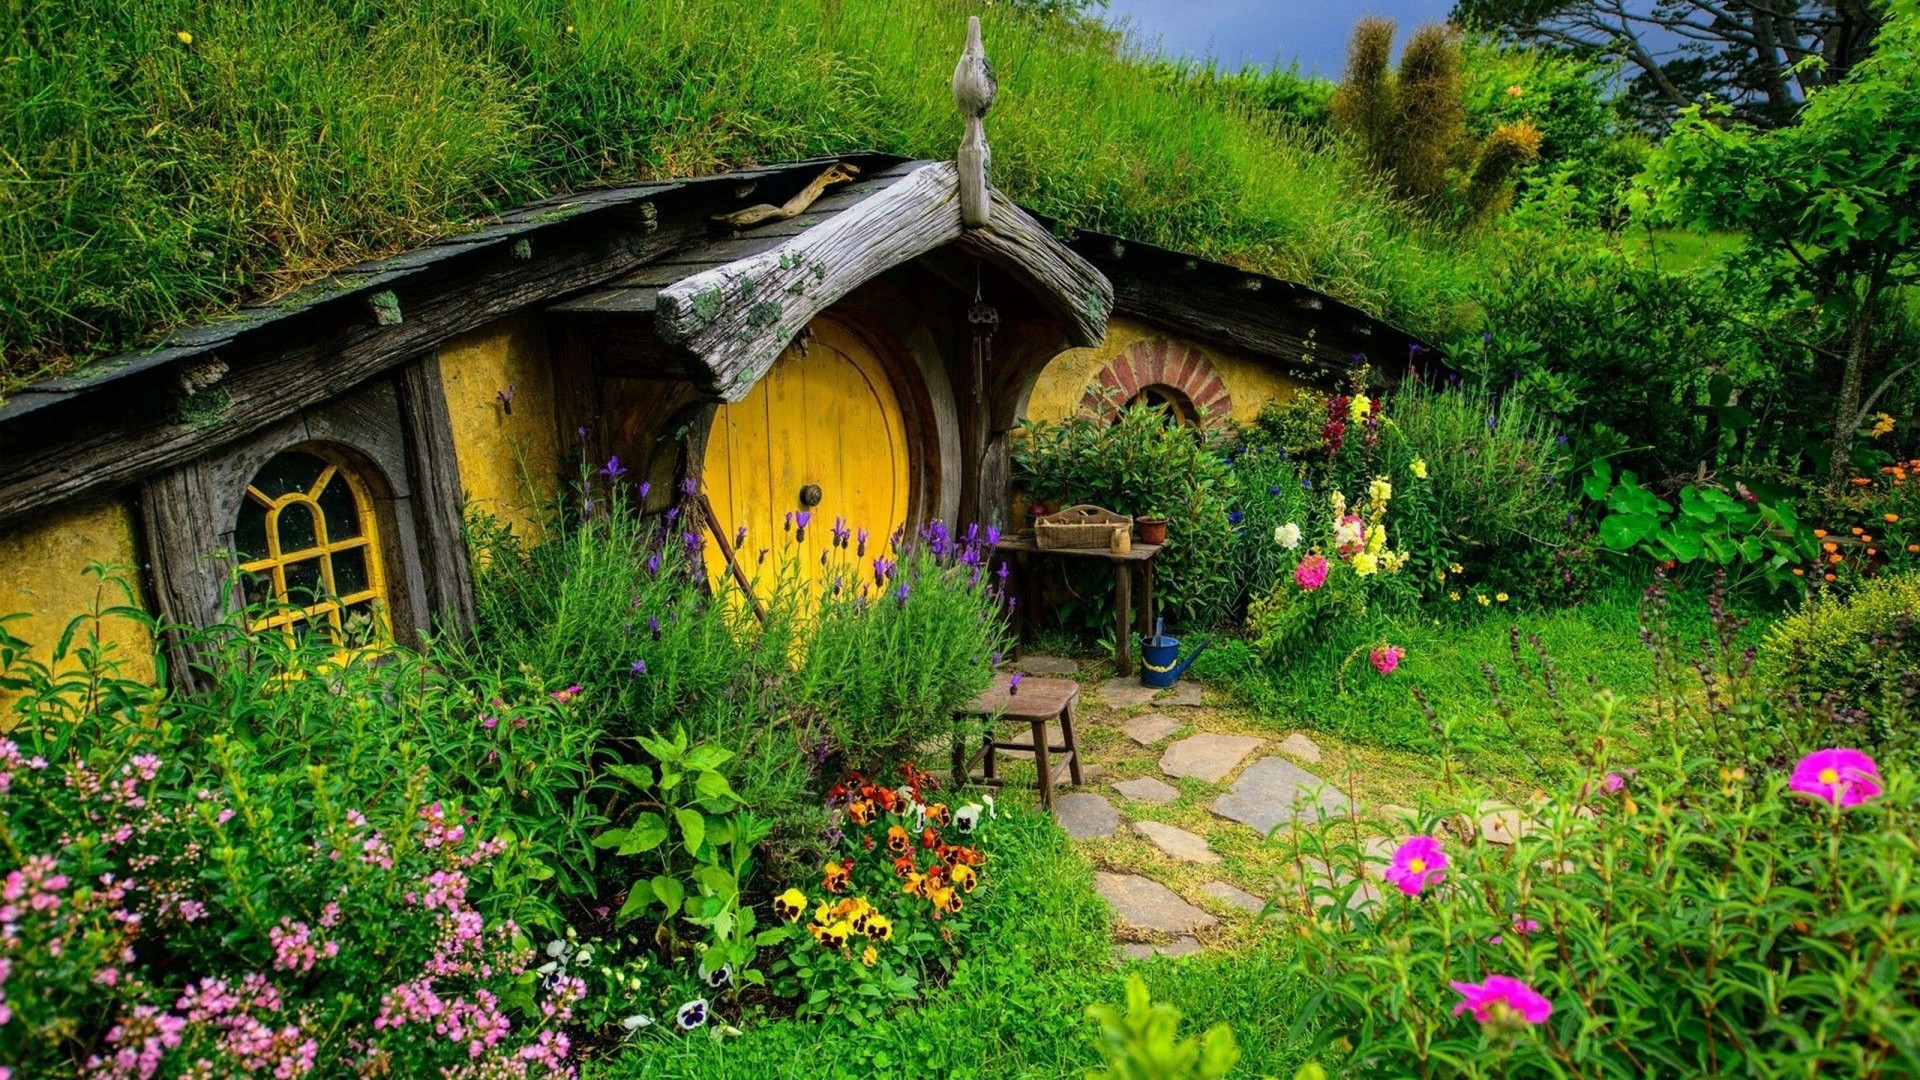 Nature Landscape House New Zealand Hobbiton Door Trees Grass Flowers Green The Lord Of The Rings The 1920x1080